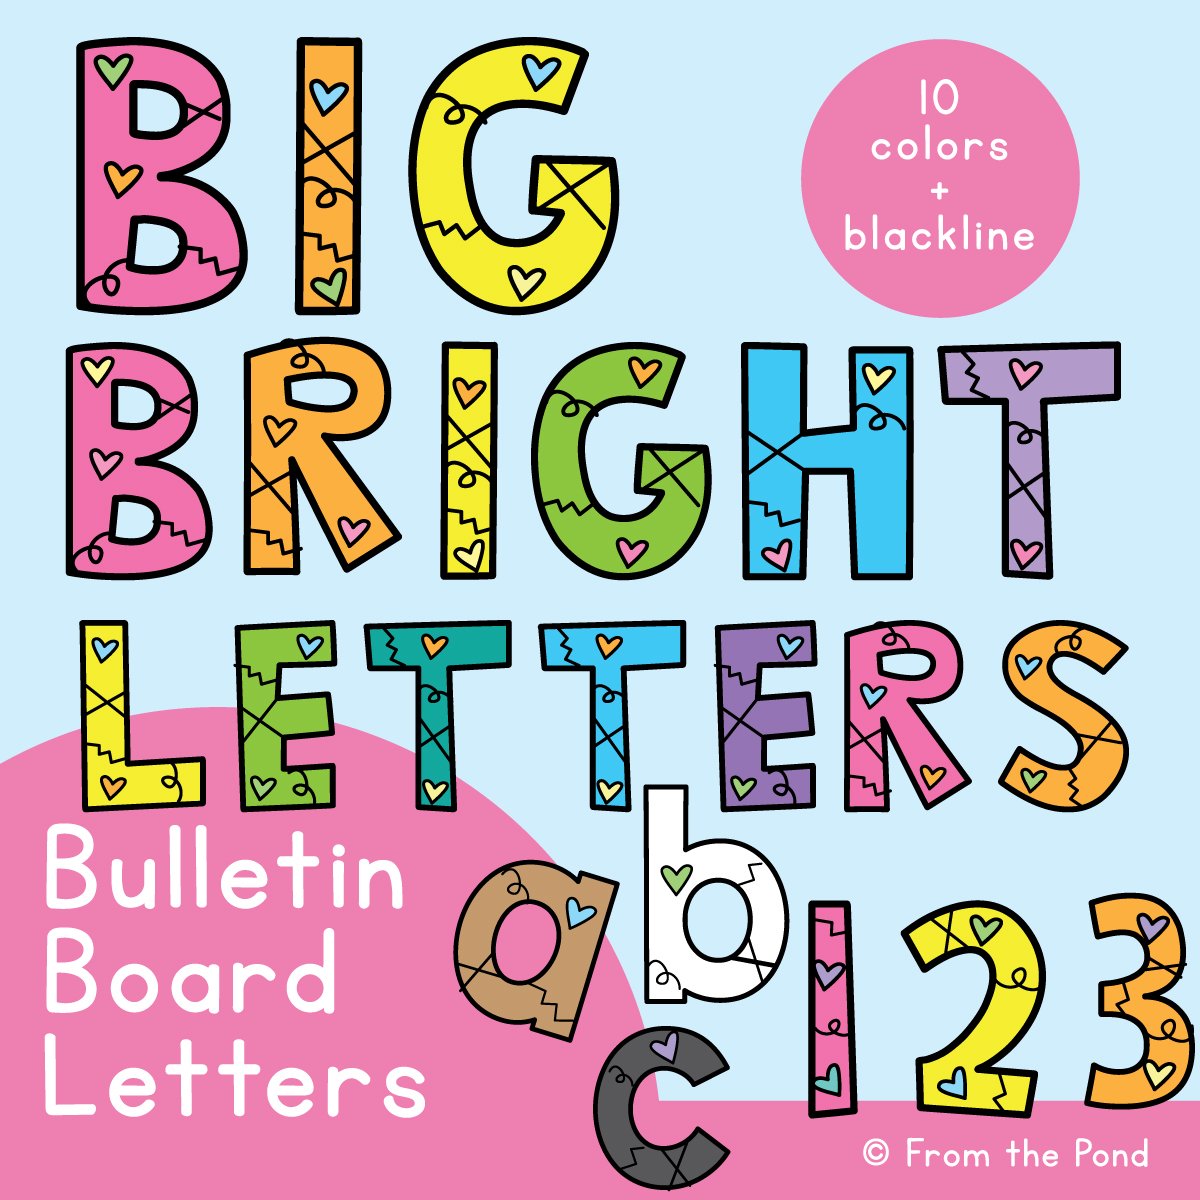 Big Printable Bulletin Board Letters for Teacher's Classroom, DIY Signs,  and Party Banners, Print and Cut Letter Set and Digital Download 